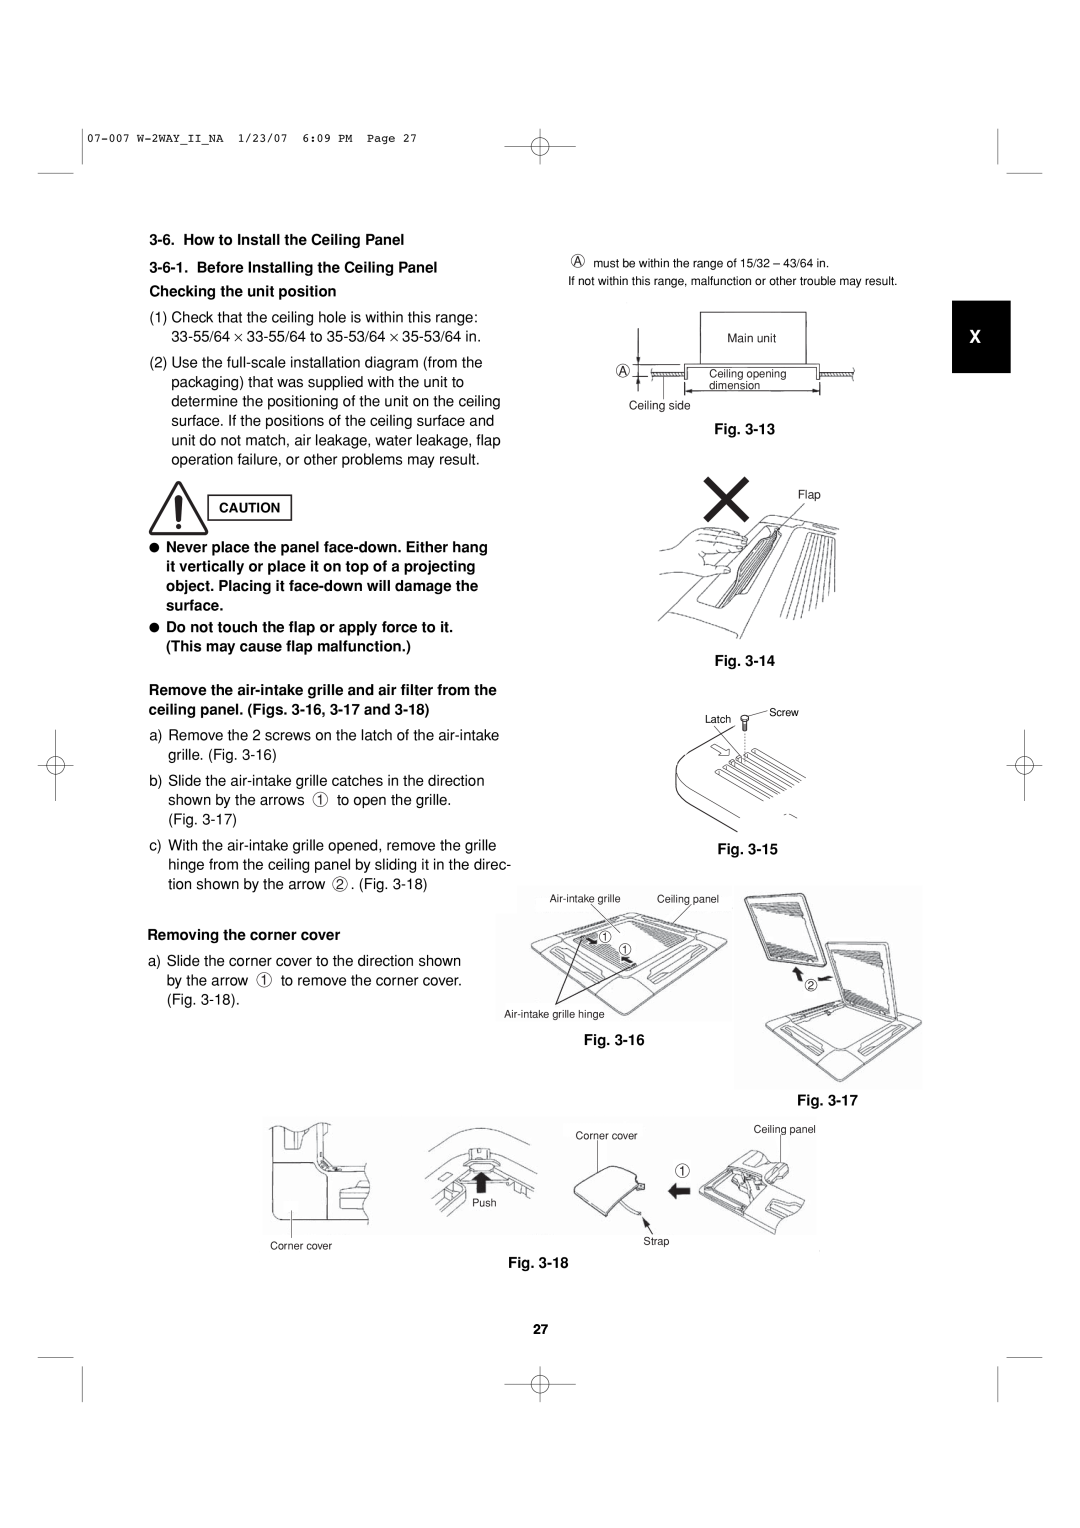 Sanyo 85464359982001 installation instructions How to Install the Ceiling Panel, Removing the corner cover, Fig 